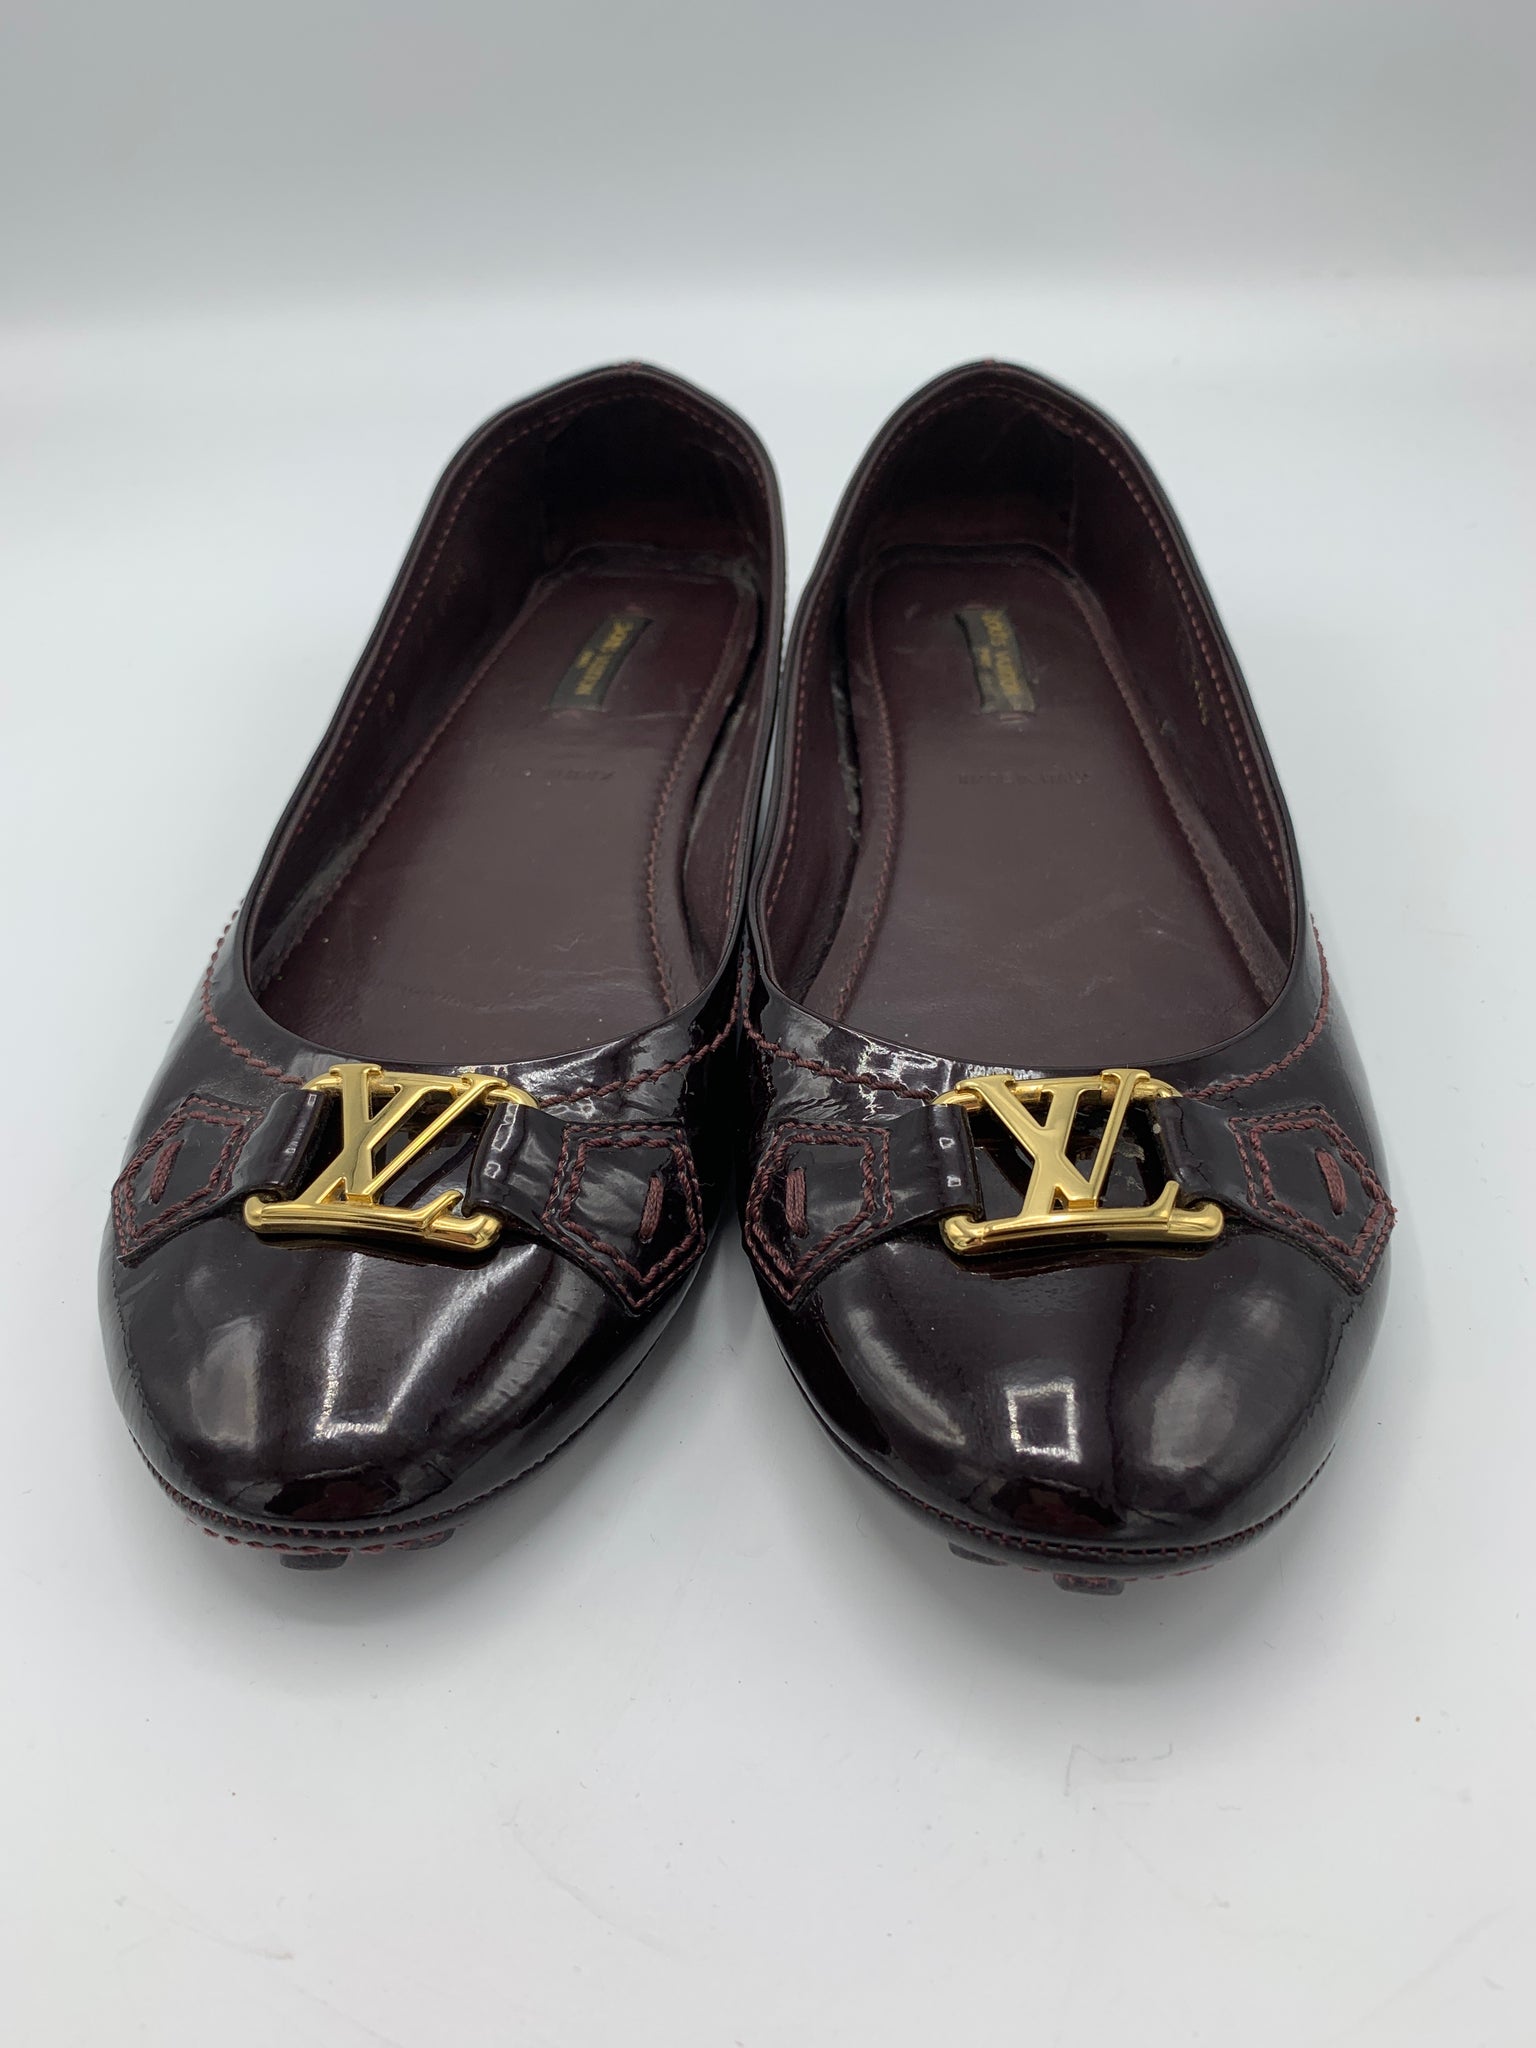 LOUIS VUITTON DRIVING WOMENS MOCCASINS PATENT LEATHER FLATS SHOES